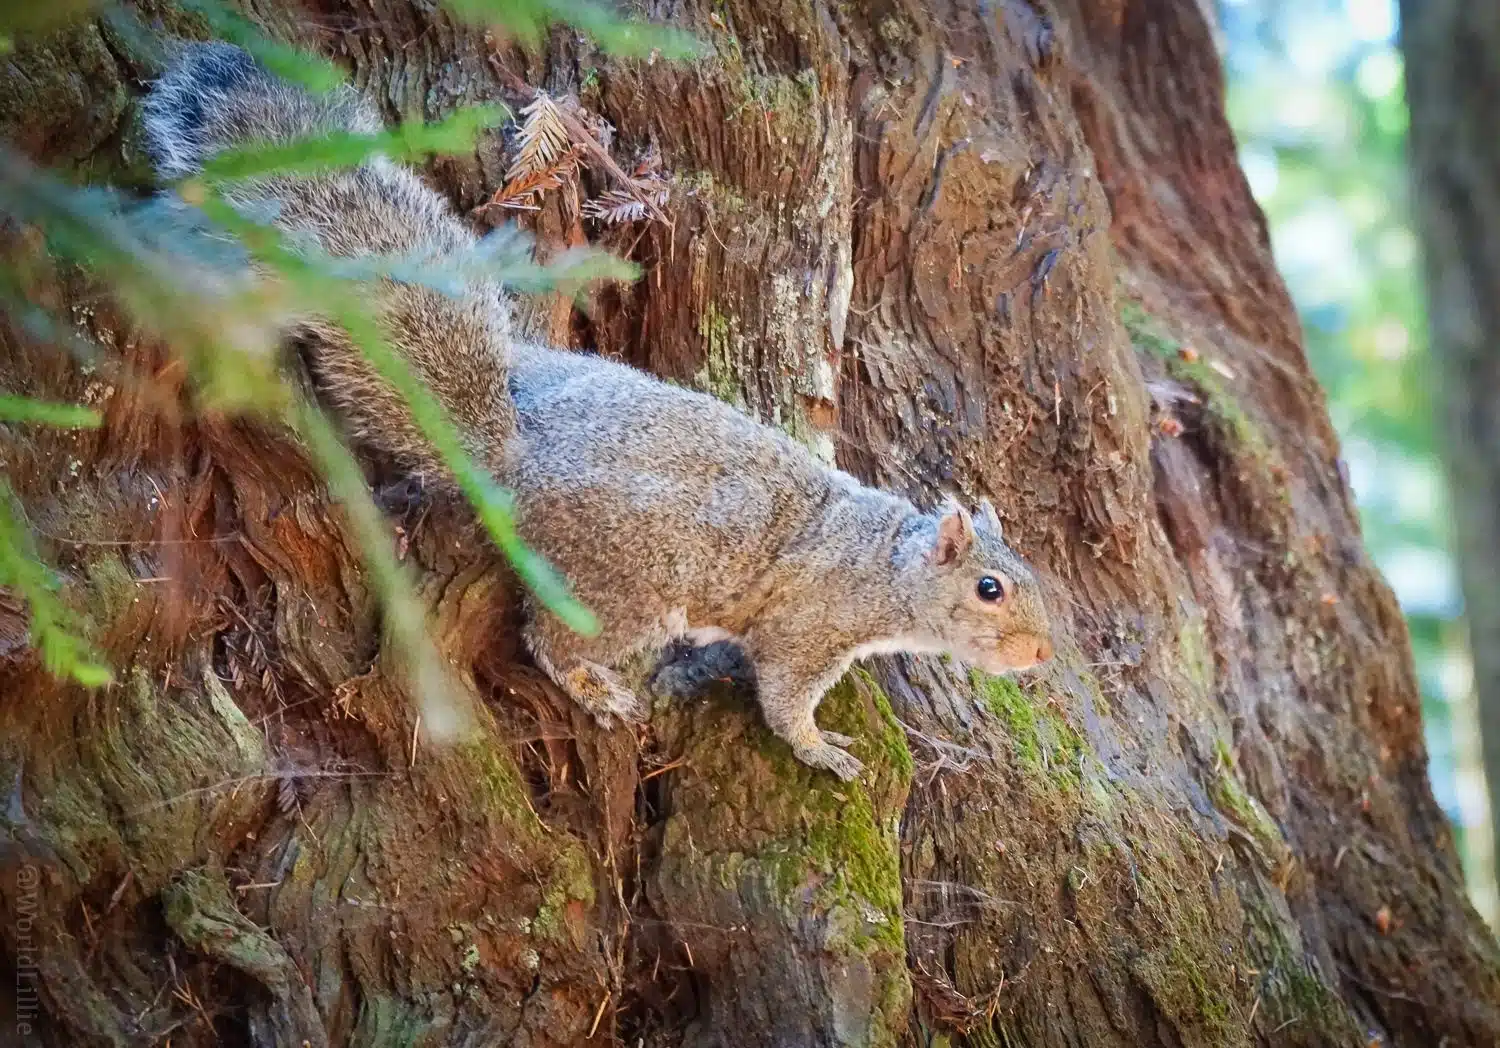 The squirrel eyed us from his perch high on the trunk.